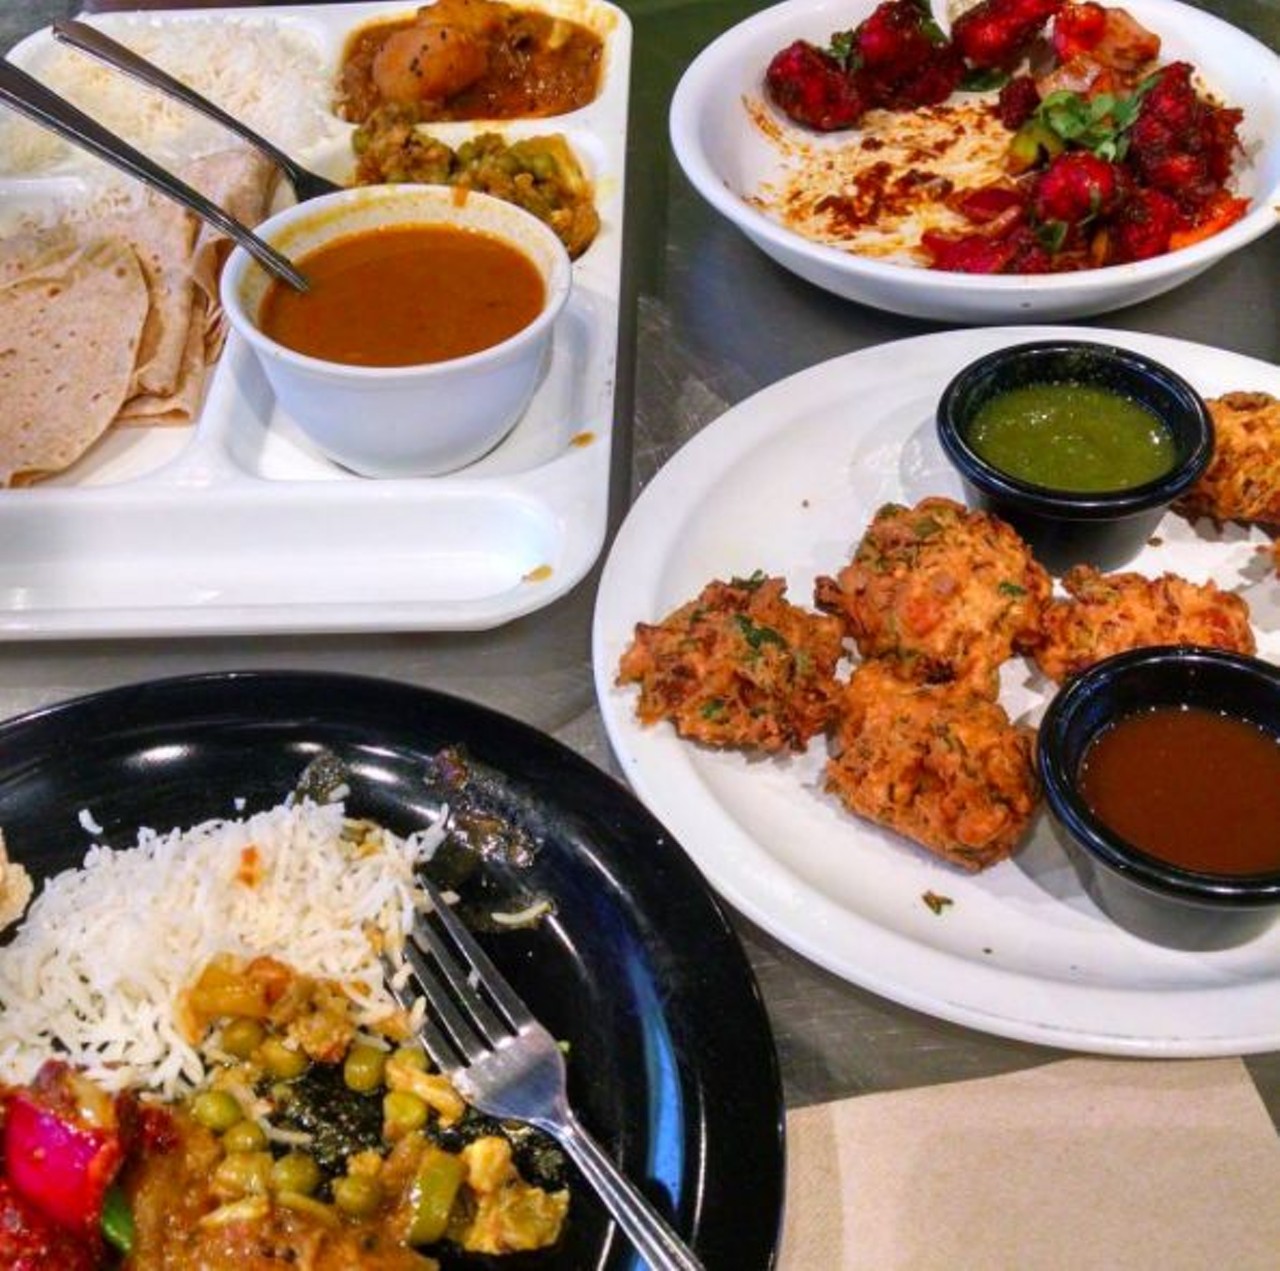 NeeHee&#146;s
45656 Ford Rd., Canton, MI 48187- 734-737-9777
This family owned and operated restaurant offers Indian vegetarian street food from their Sweet Potato Chaat to their Mini Gujrati Thali. Take a walk on the wild side with some of their spicier options such as their Samosa Pav or Mirchi Bhajia and finish it off with their homemade ice cream.
(Photo via IG account @alethanotahipster)